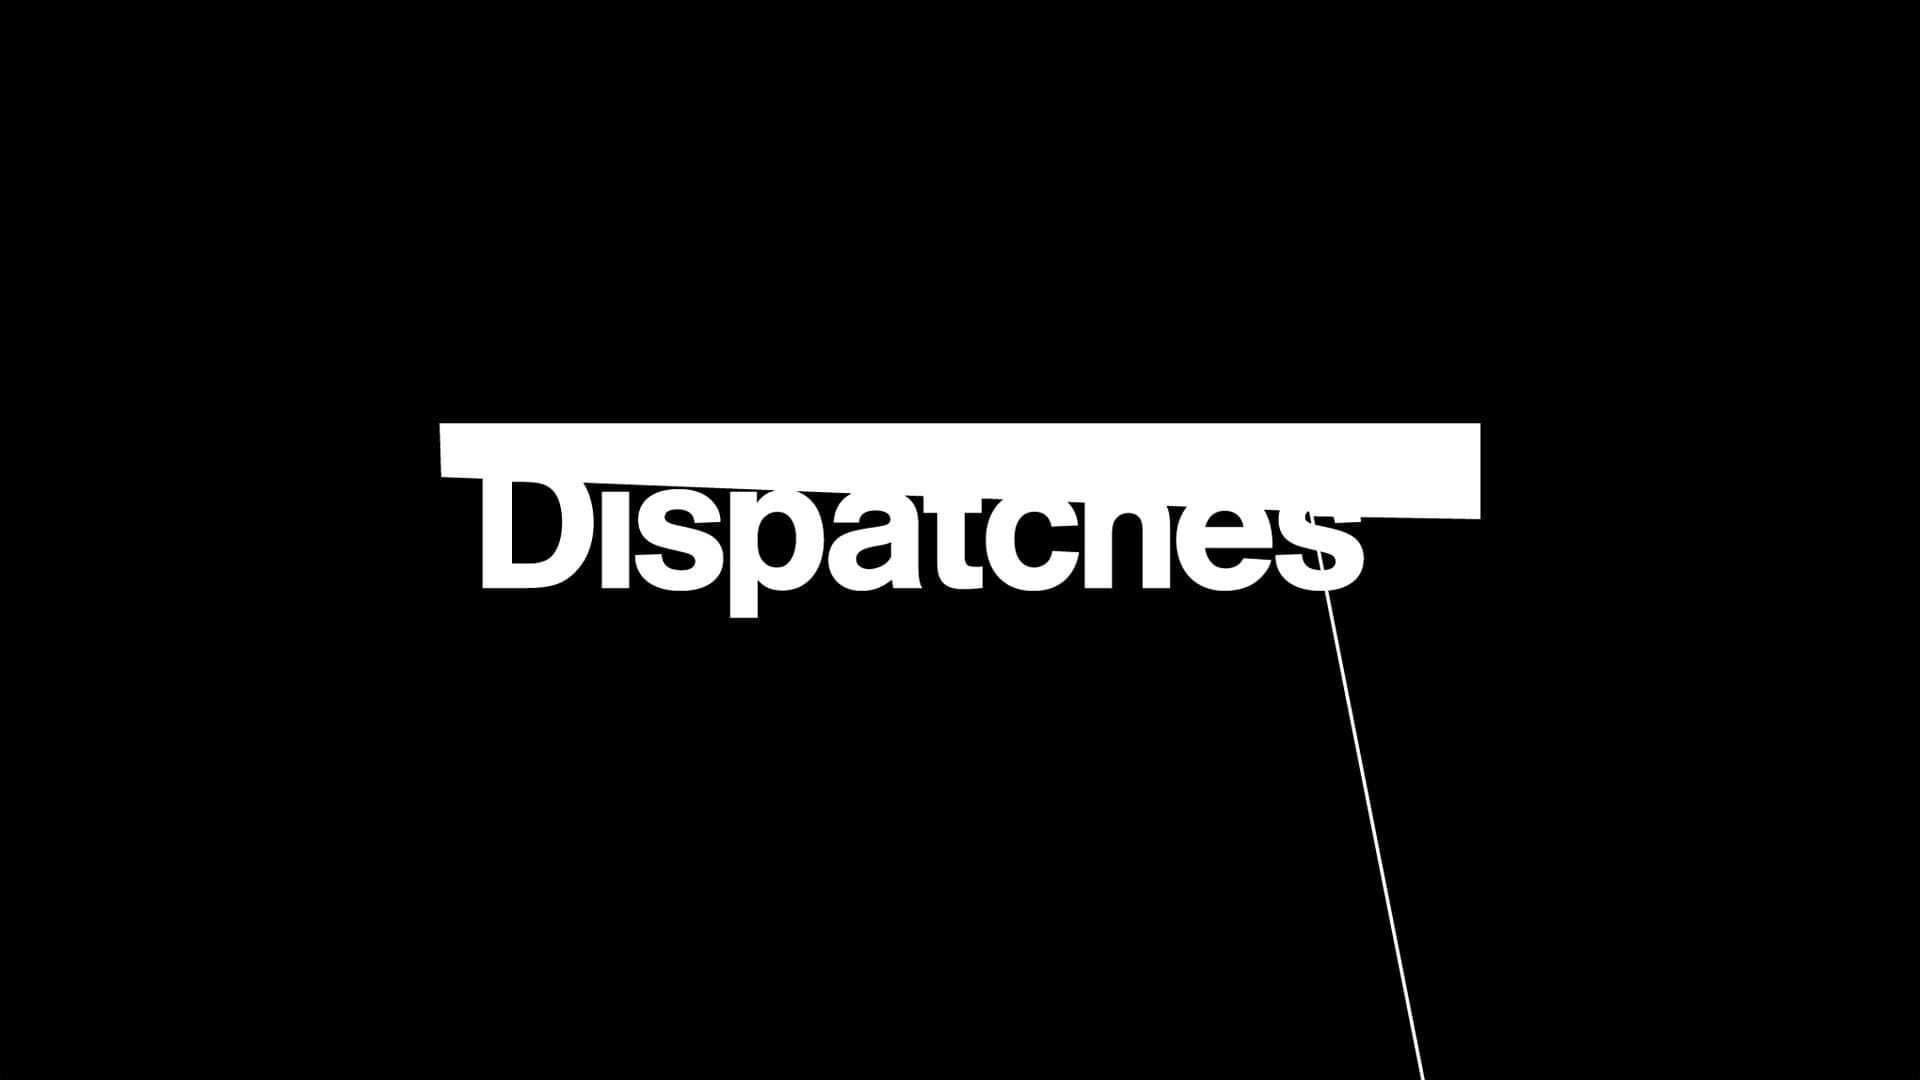 Dispatches background